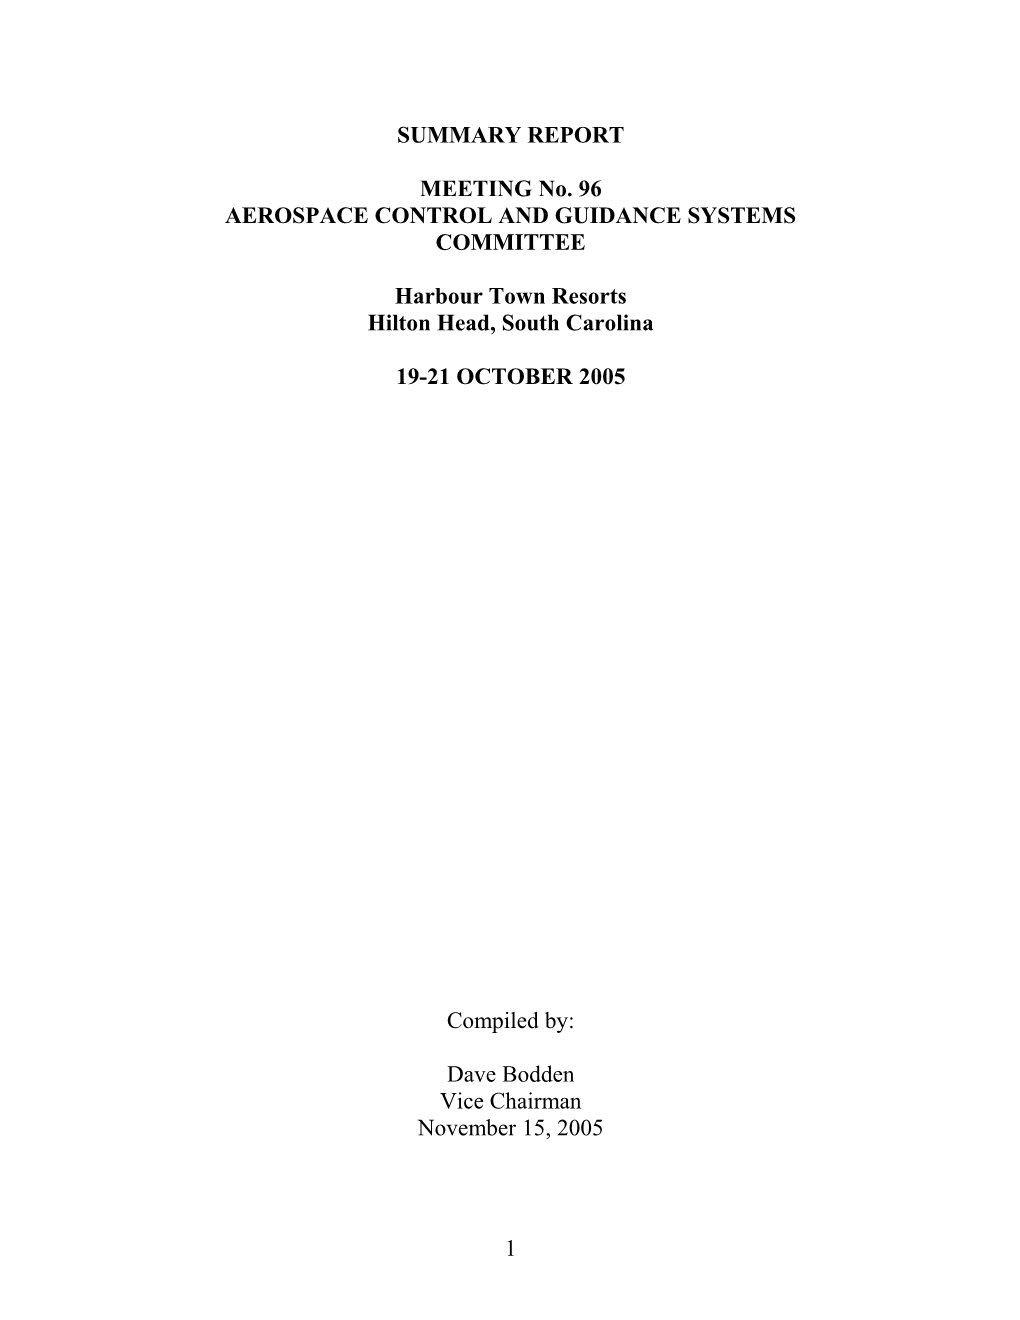 Aerospace Control and Guidance Systems Committee